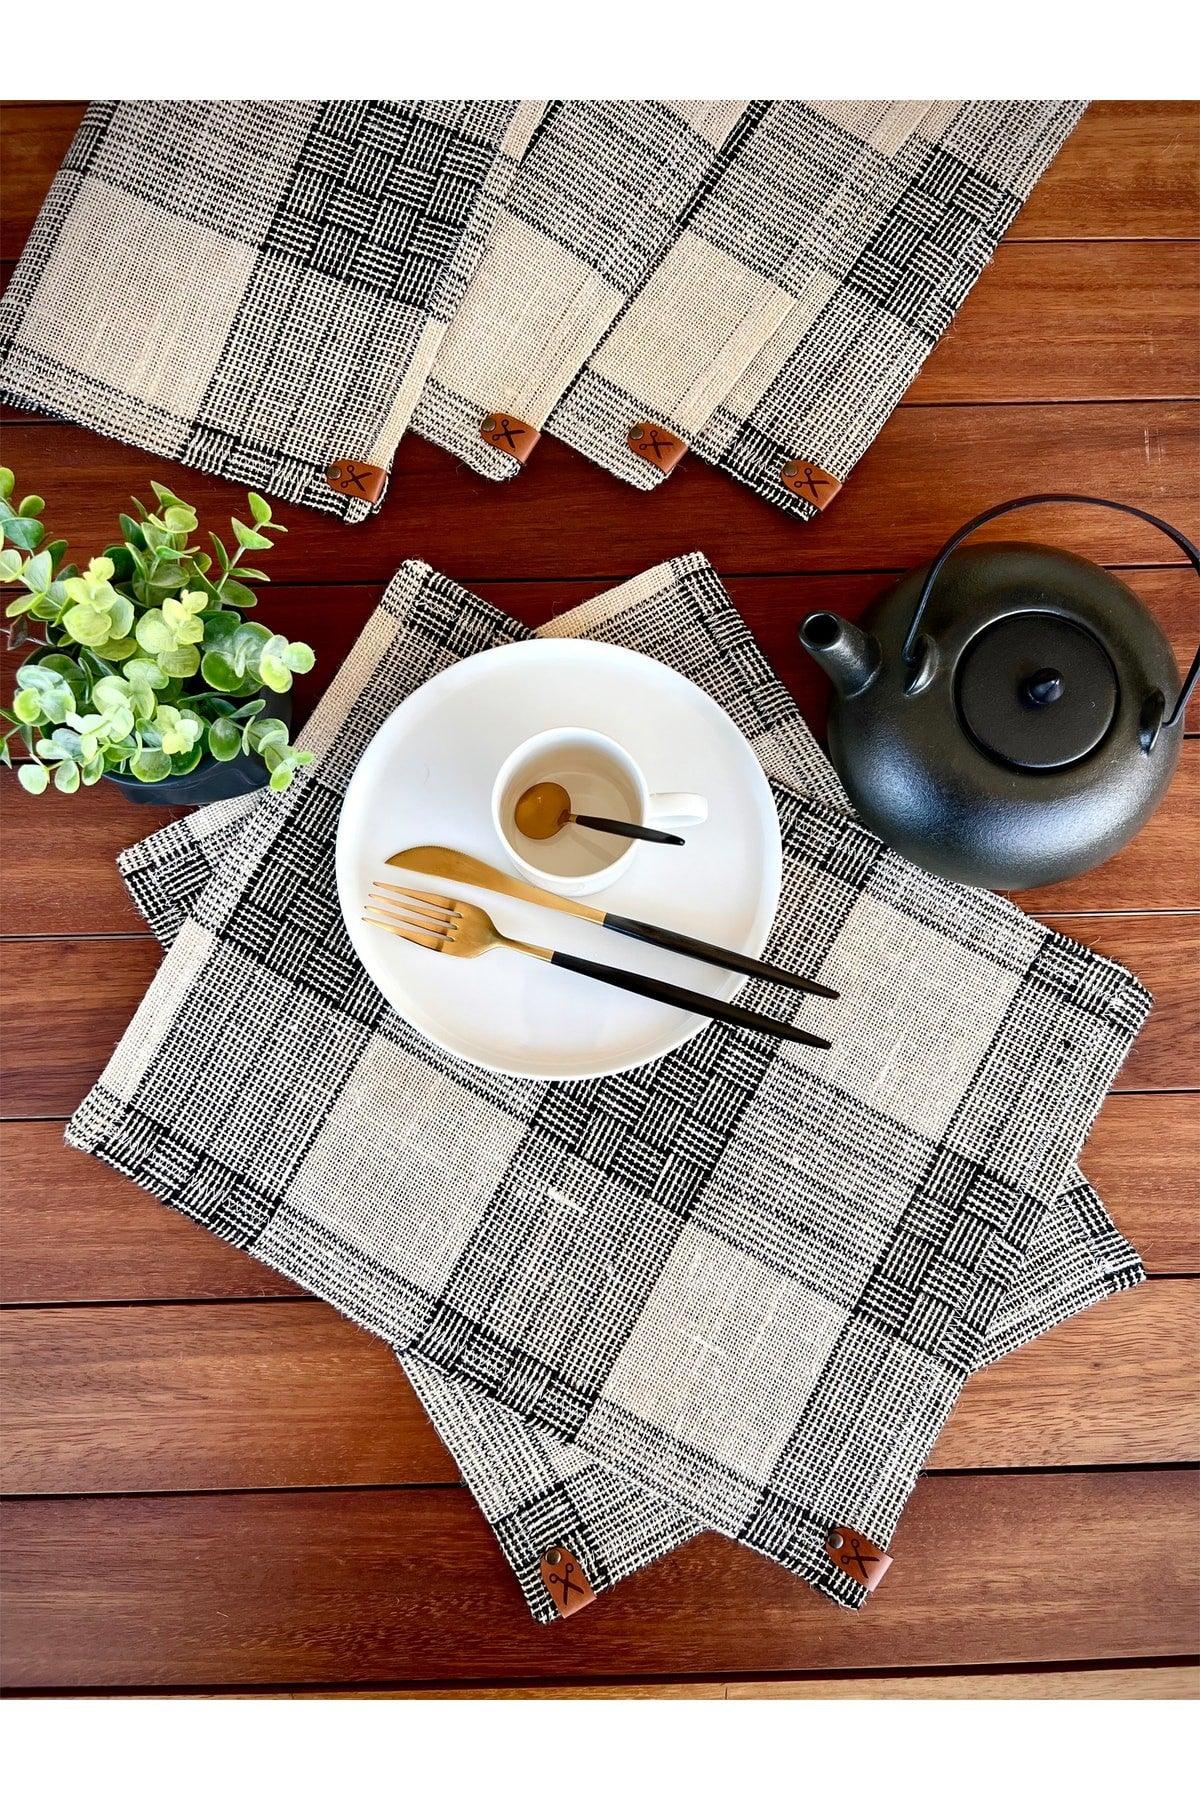 6 Pieces Rectangular Straw, Jute Placemat Cover Knit Serving Set - Striped - Swordslife